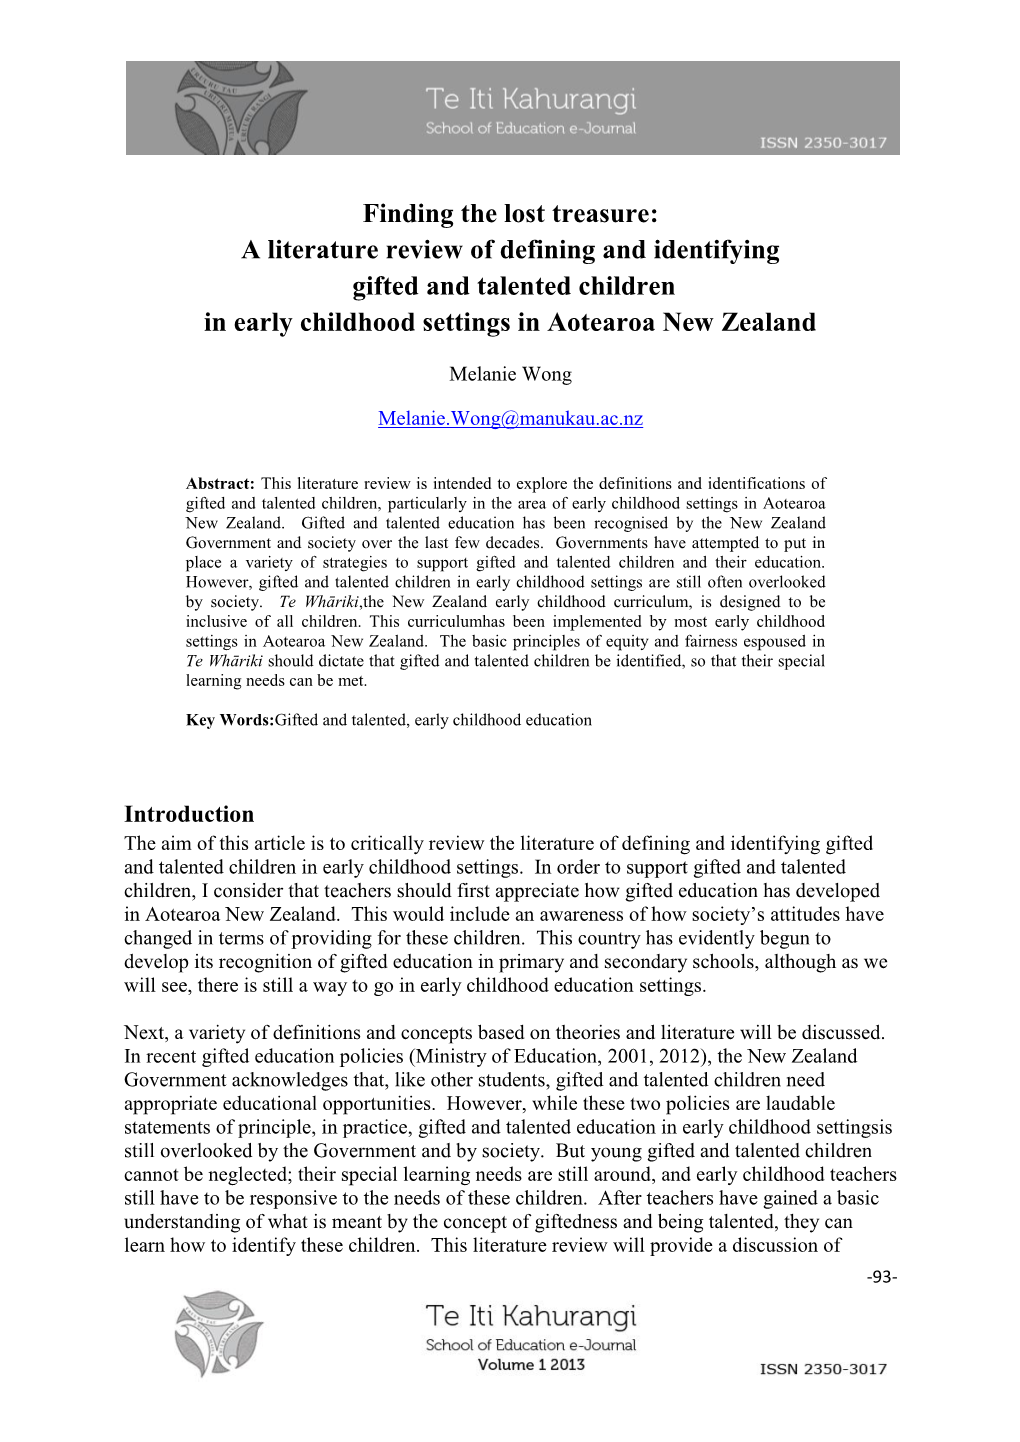 A Literature Review of Defining and Identifying Gifted and Talented Children in Early Childhood Settings in Aotearoa New Zealand